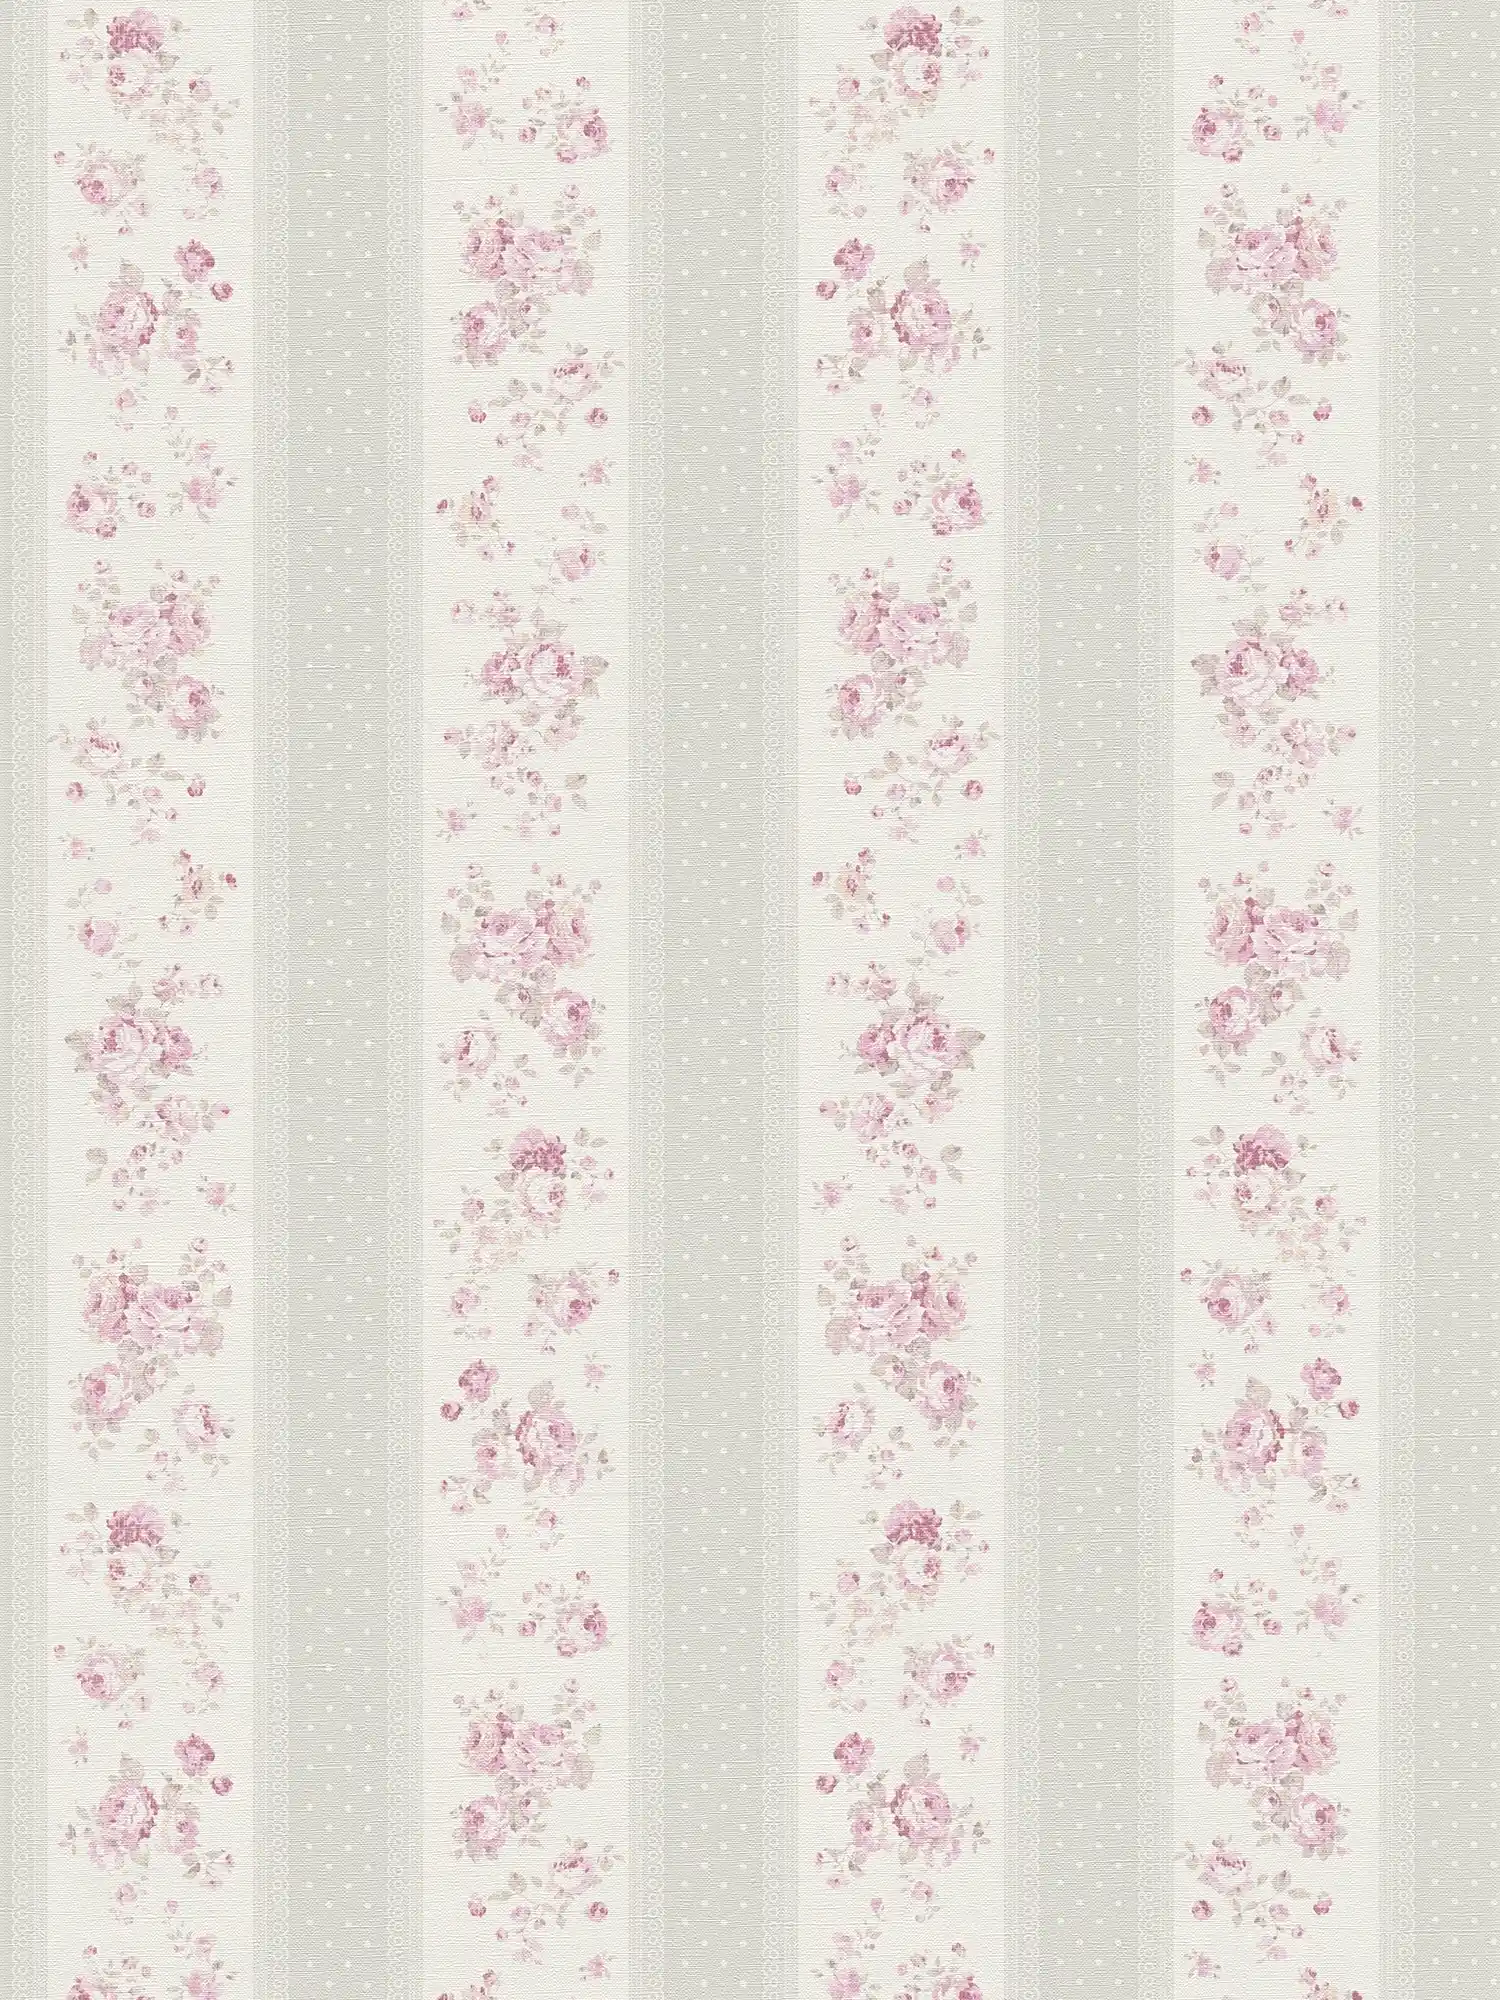 Striped wallpaper with flowers and dot pattern - grey, white, pink
